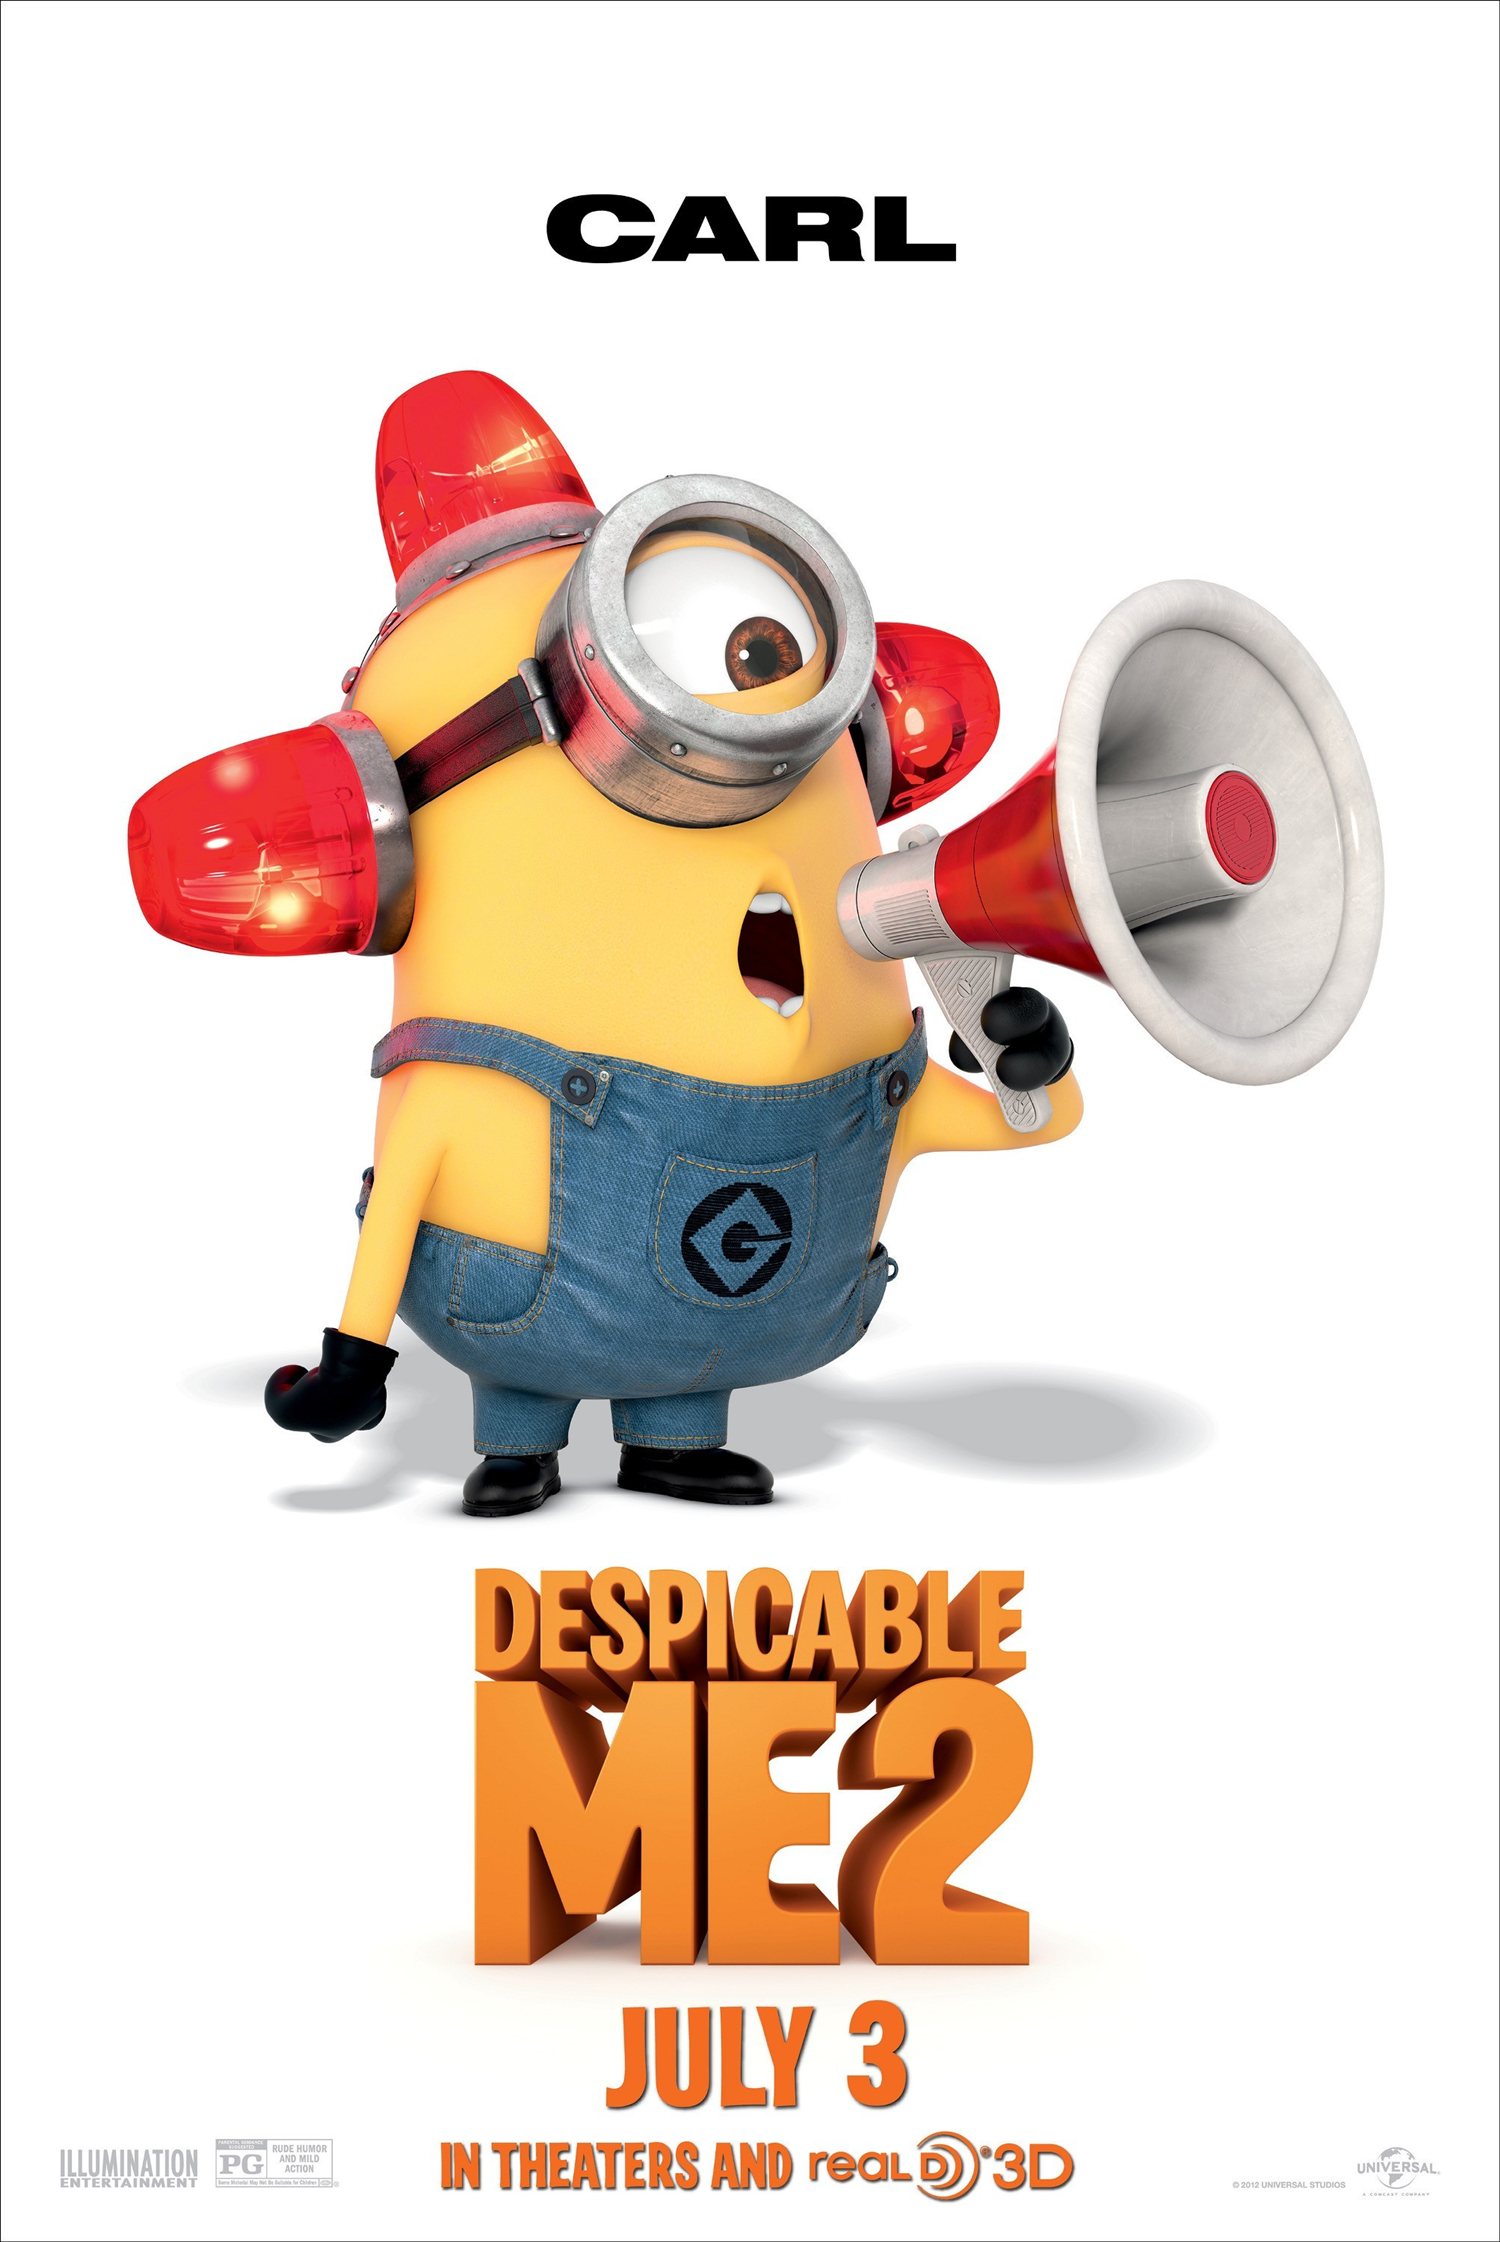 Minions/Gallery - Despicable Me Wiki